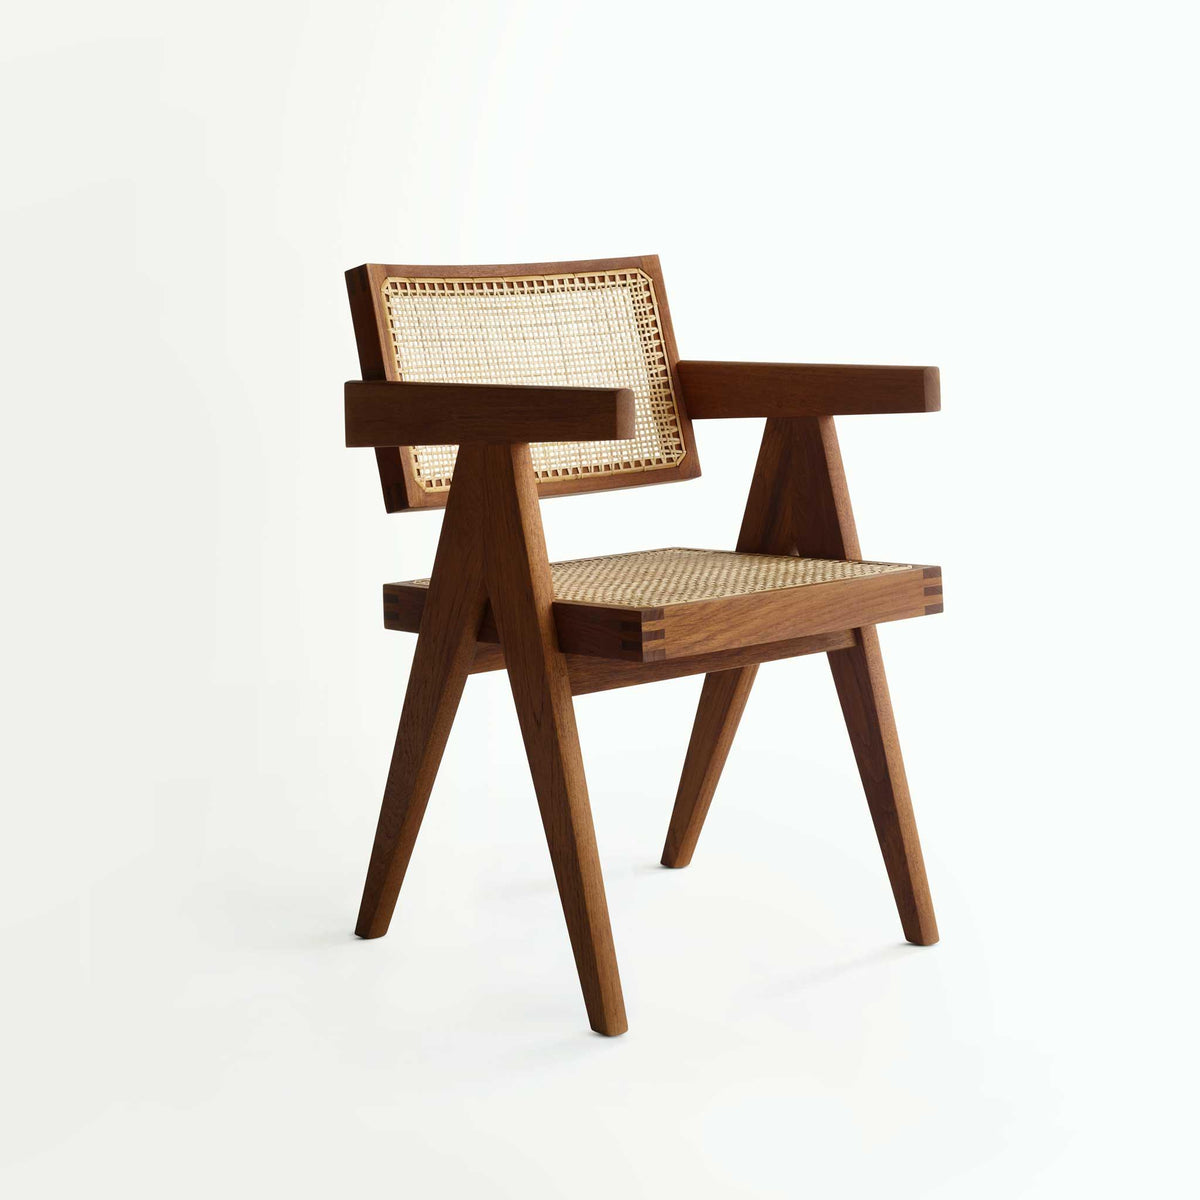 Pierre Jeanneret Design Chair Made From Teak Wood And Rattan Object Embassy